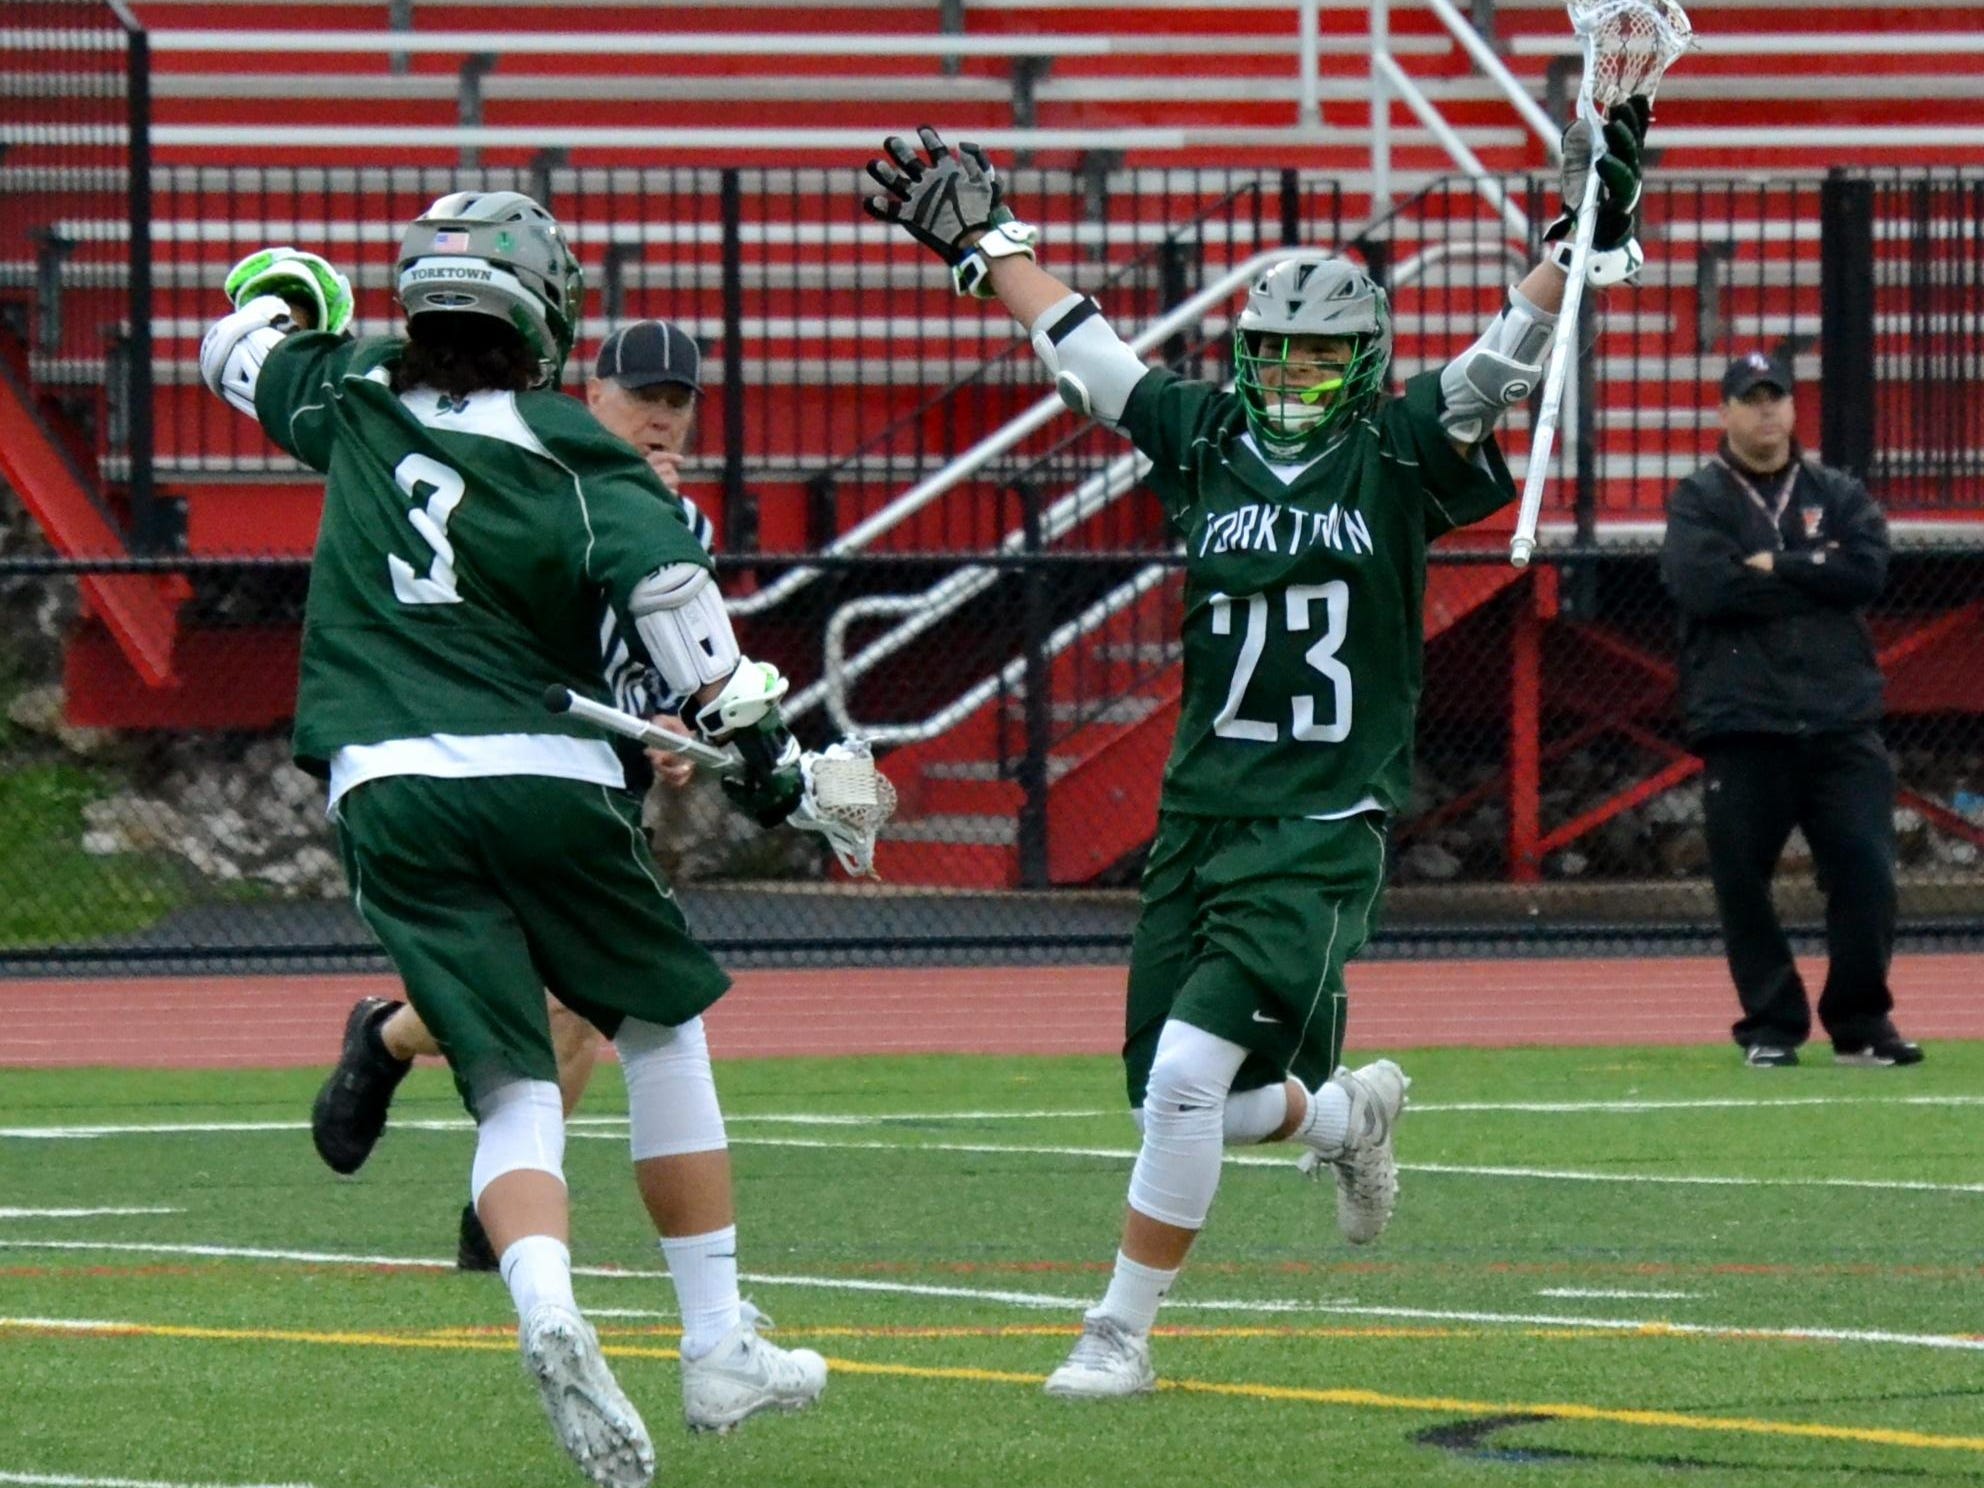 Hunter Embury (23) celebrates a third-period goal with his brother, Jamison. They each scored twice for Yorktown in an 8-6 win at Fox Lane on Tuesday.